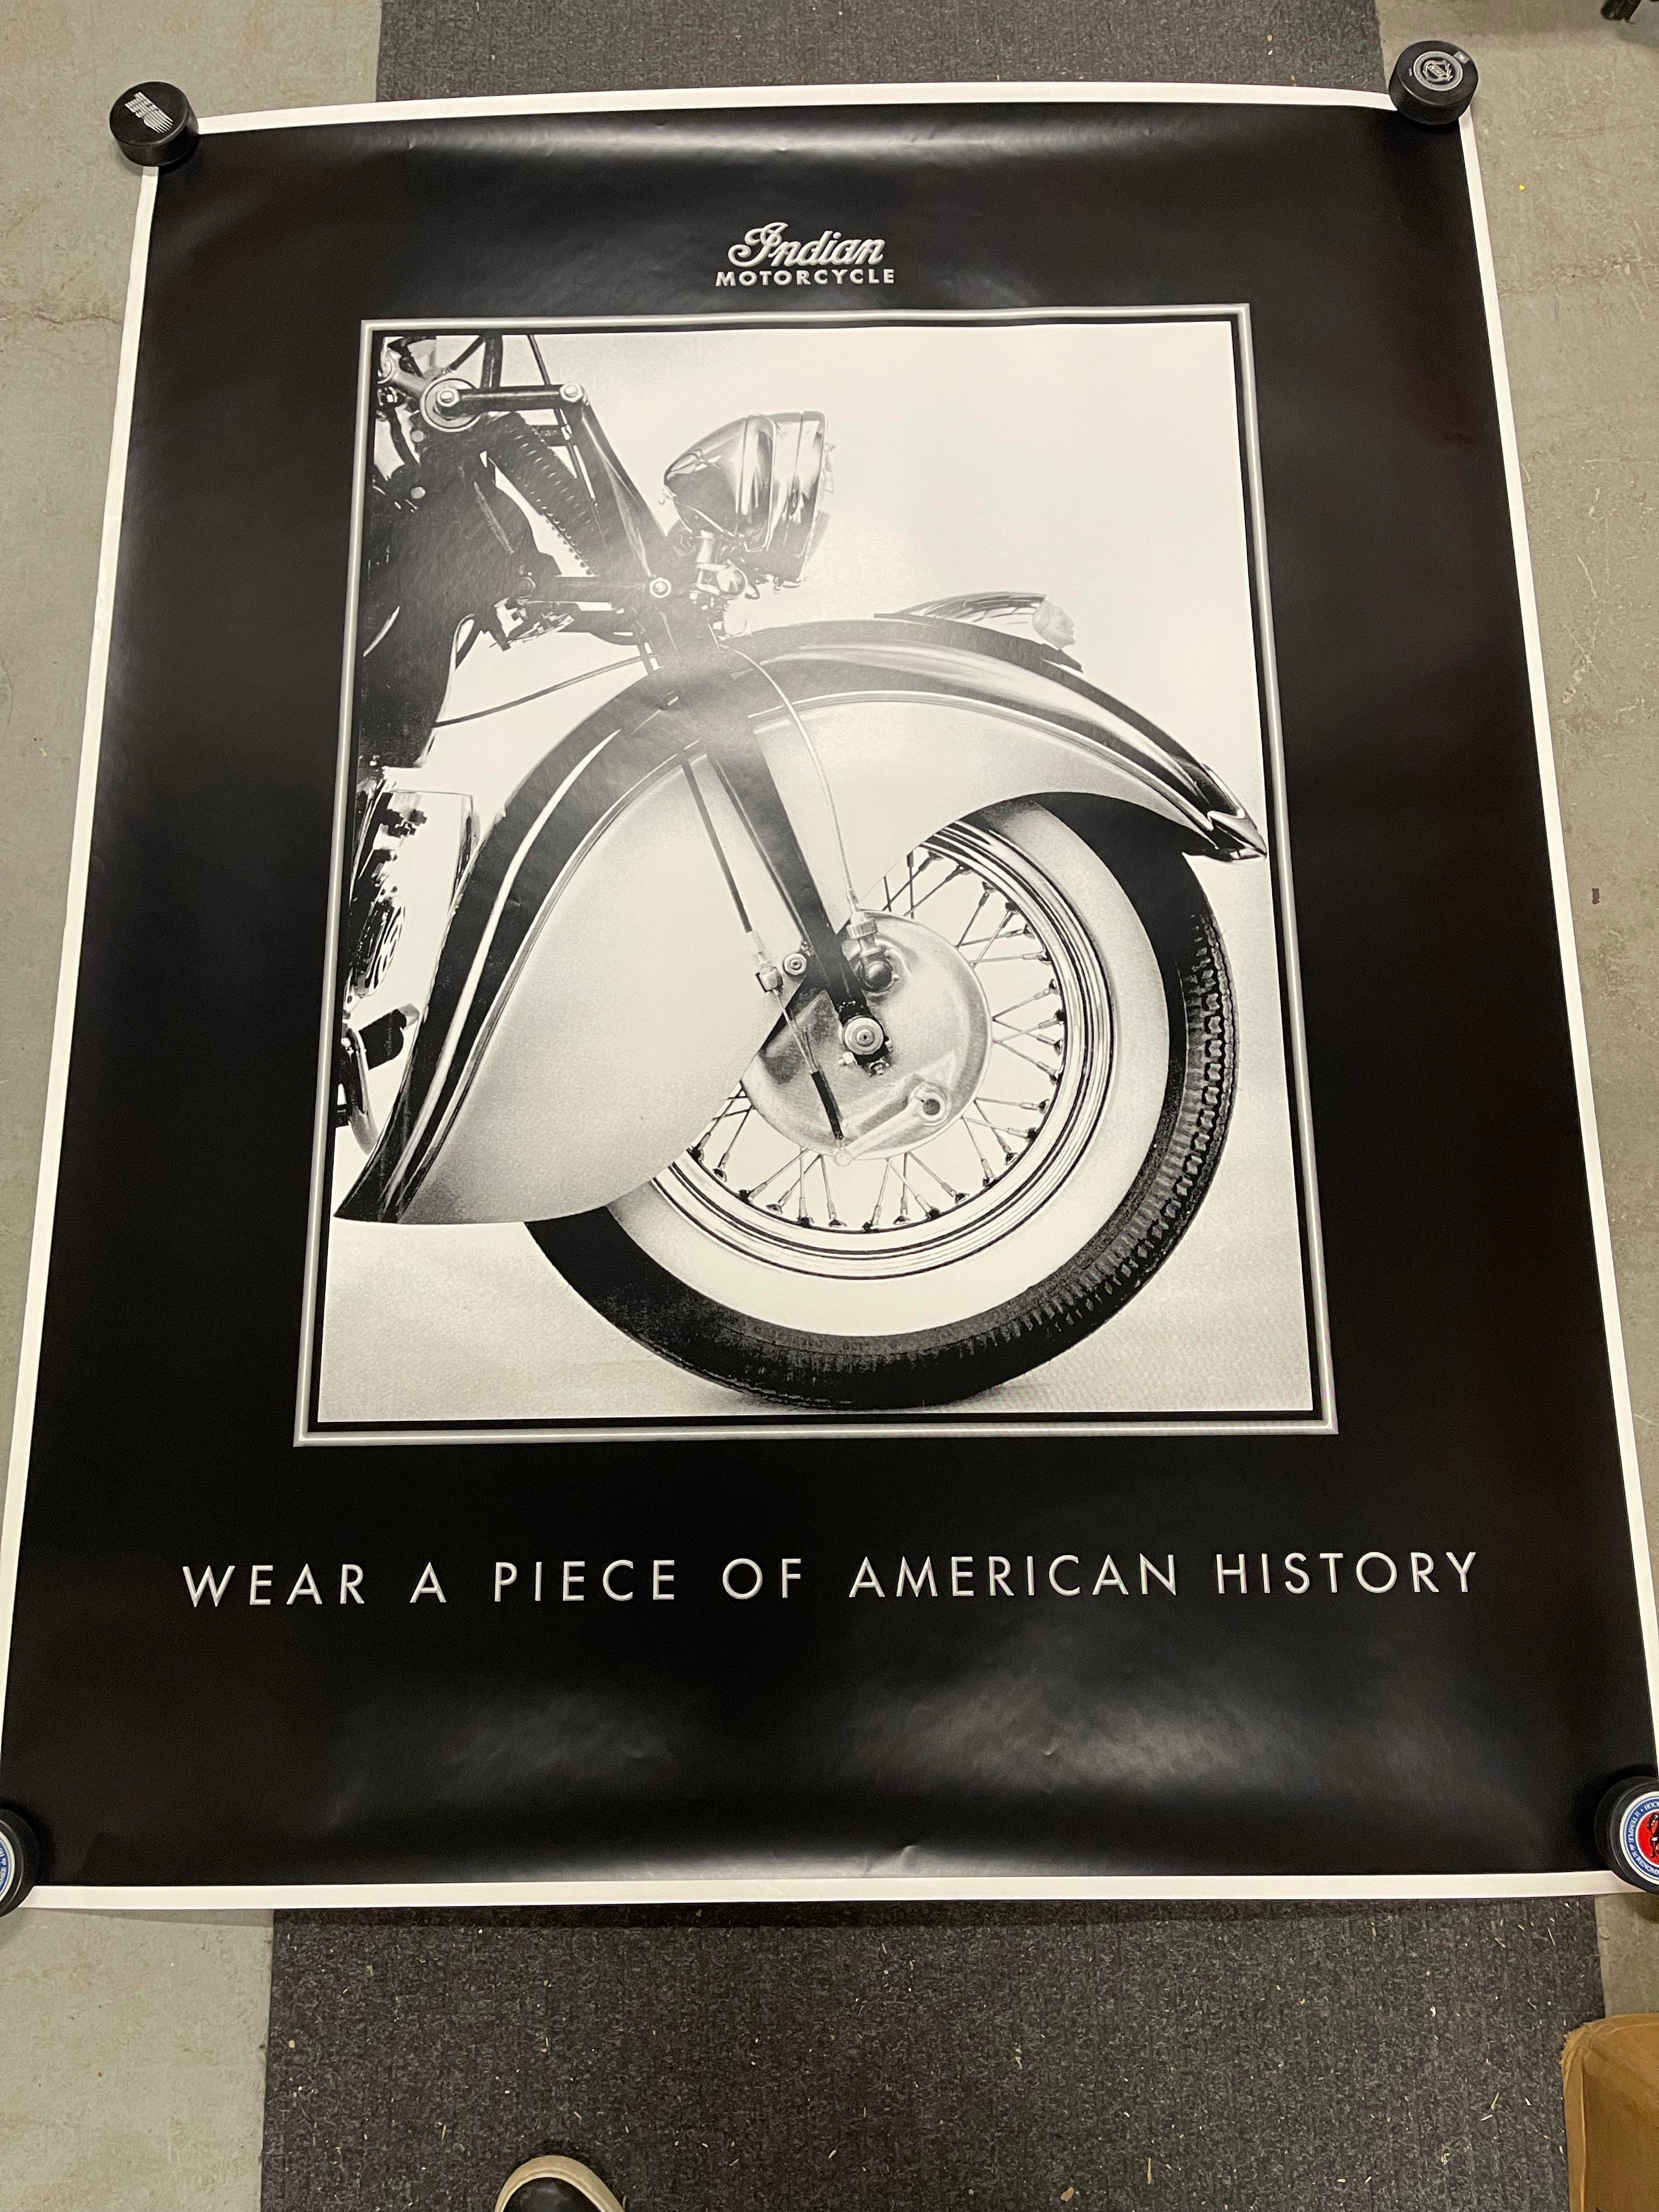 Indian Motorcycle large vintage custom 48x60 limited issue ad poster